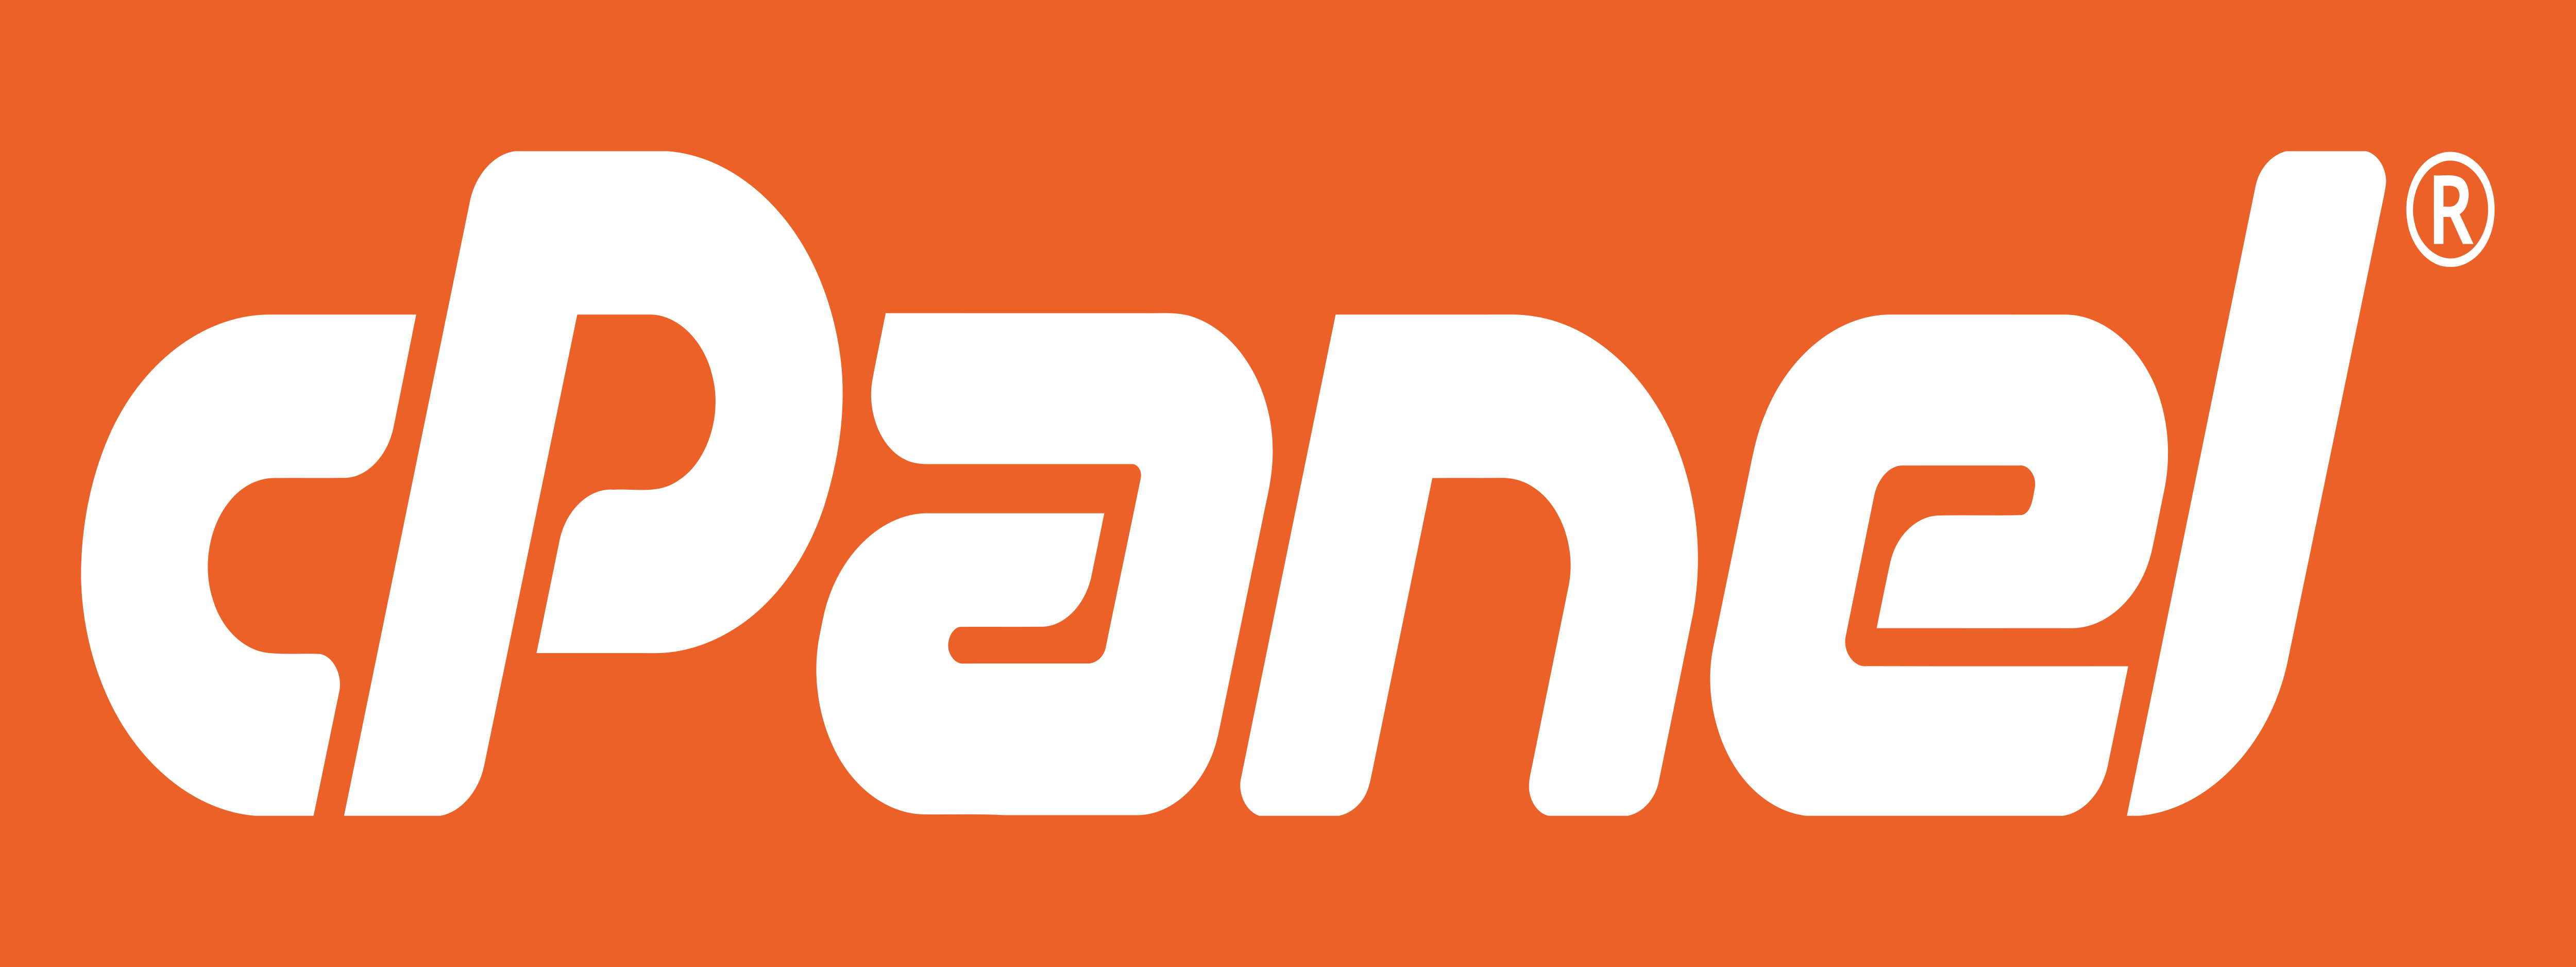 cpanel download for windows 7